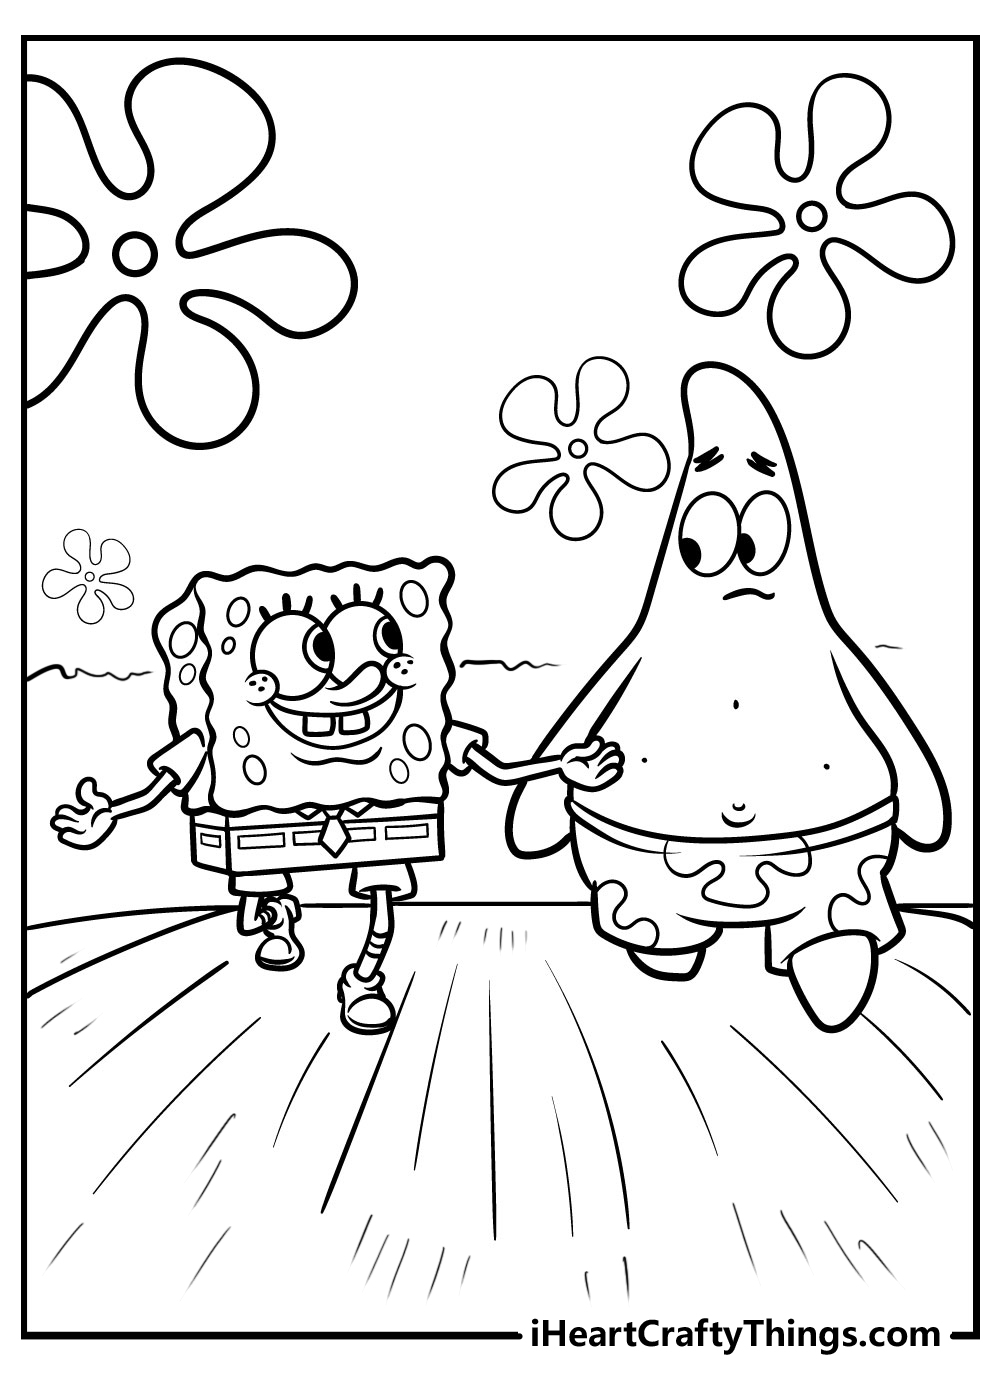 20 Super Fun Spongebob Coloring Pages Updated 2023 | Images and Photos ...